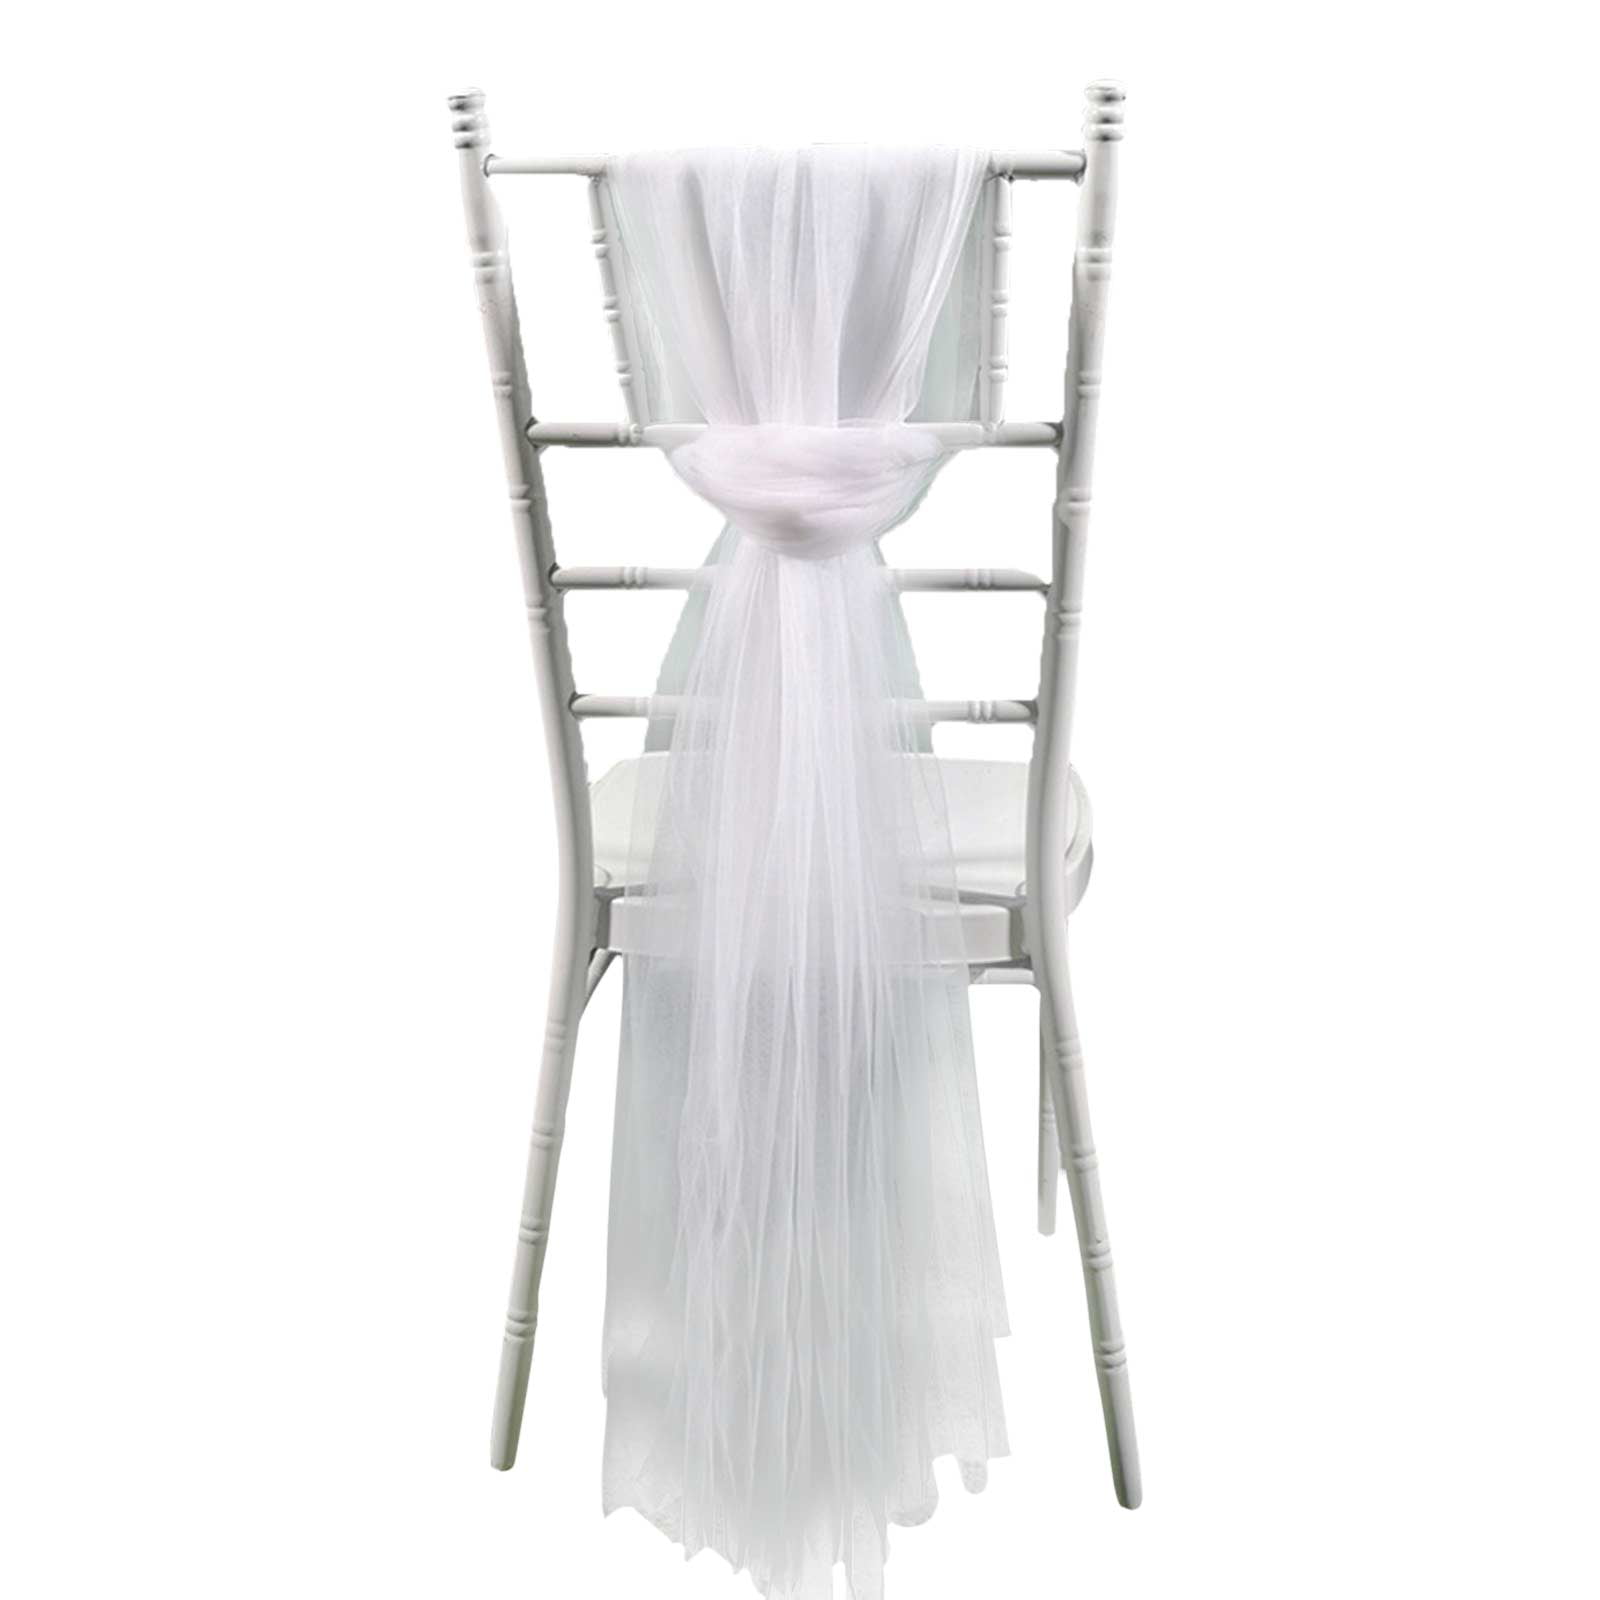 100 Polyester Square Banquet/Chiavari Chair Cover Wedding Party Decor 3 Colors! 